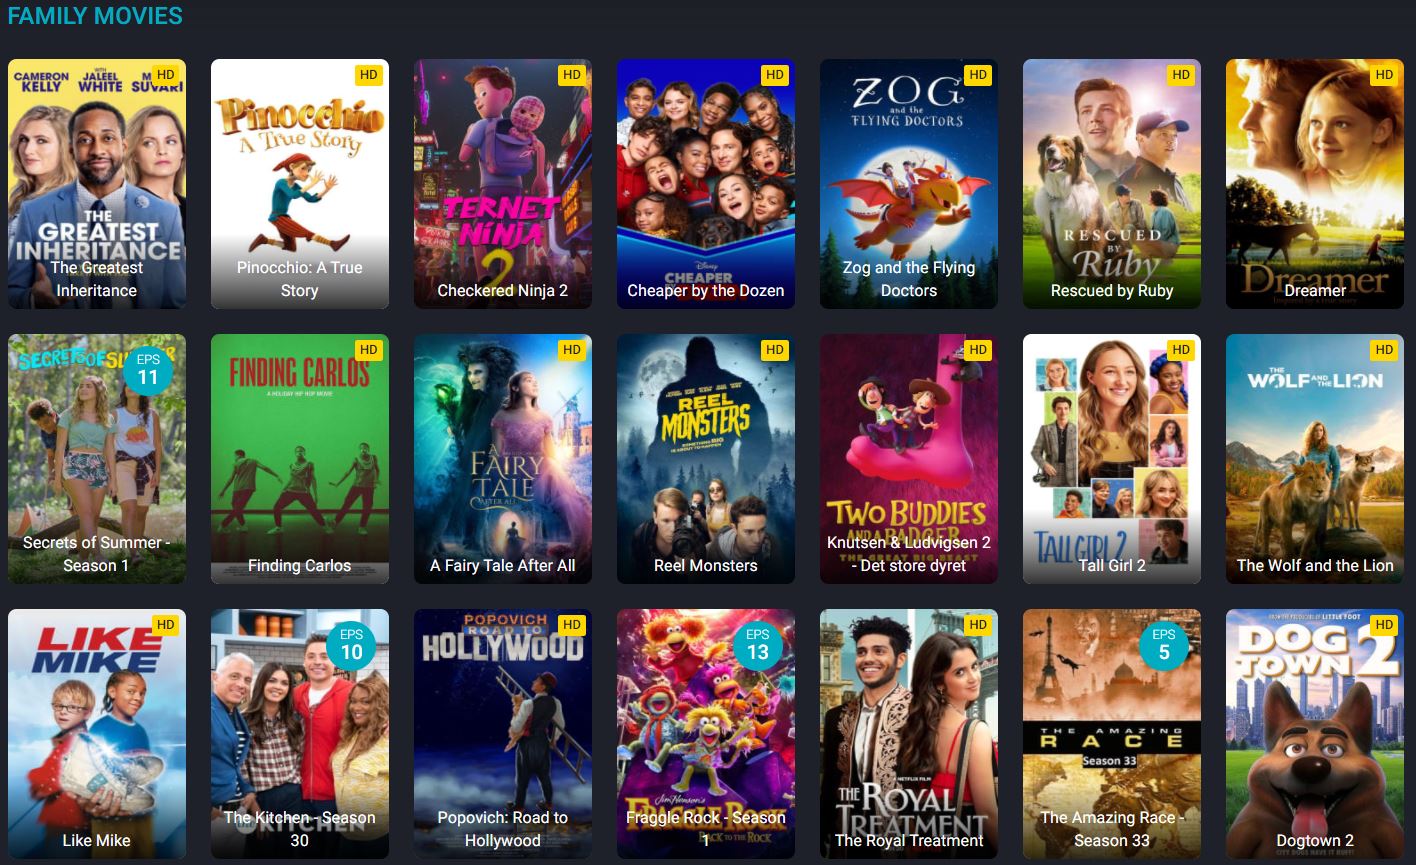 Screenshot of the family movies collection on fmovies website